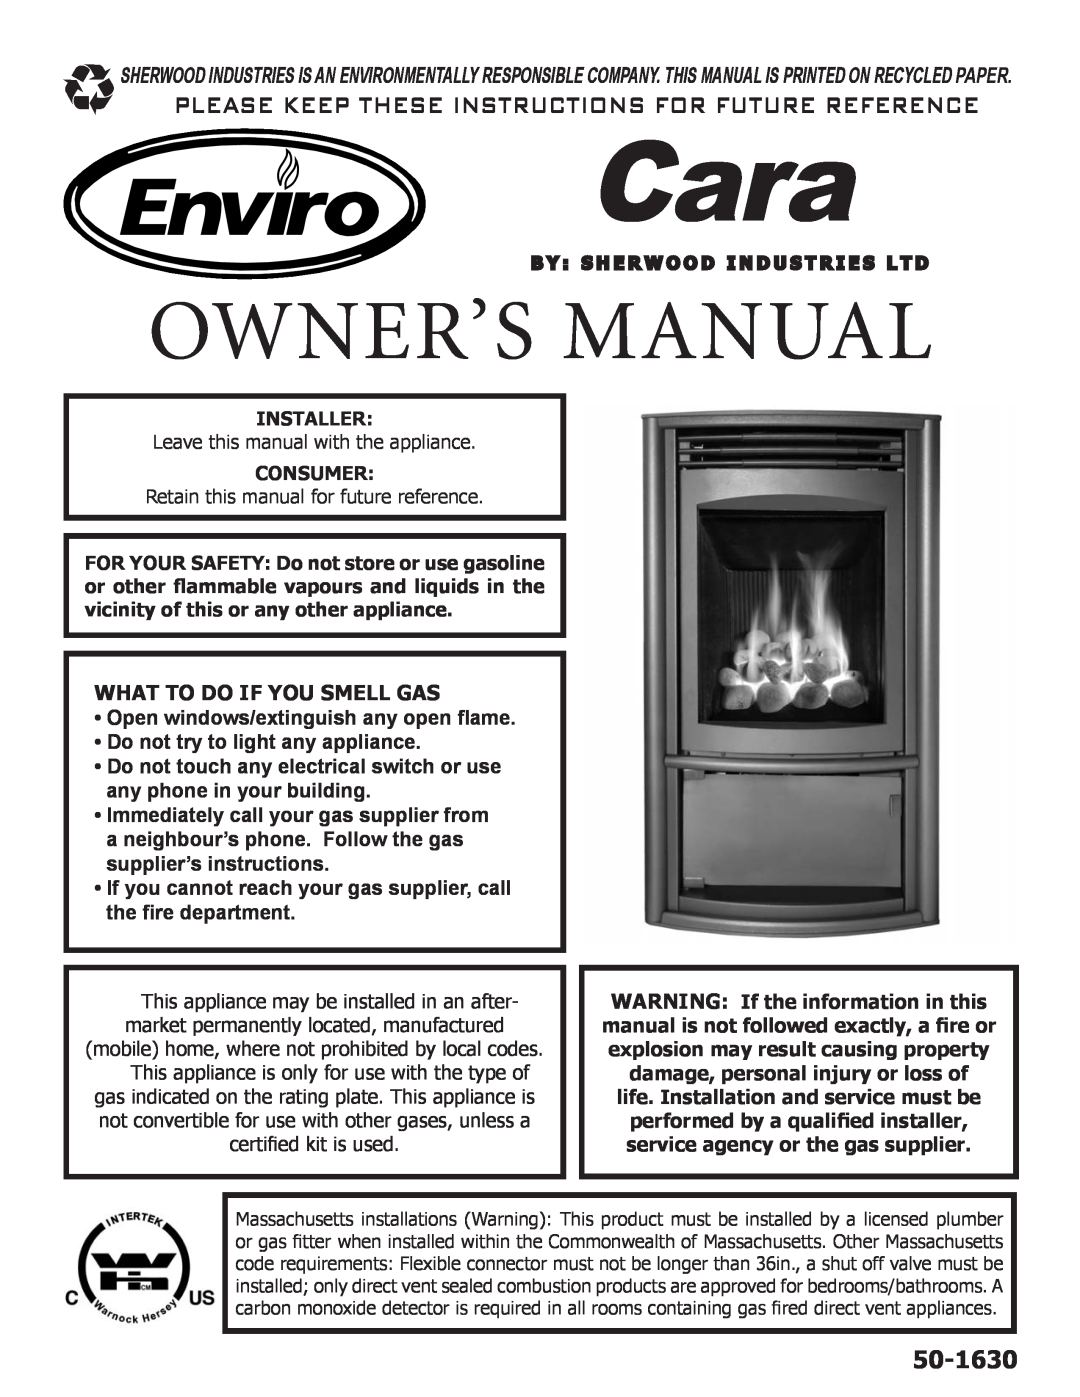 Enviro Cara owner manual What To Do If You Smell Gas, Installer, Consumer, Open windows/extinguish any open flame, 50-1630 